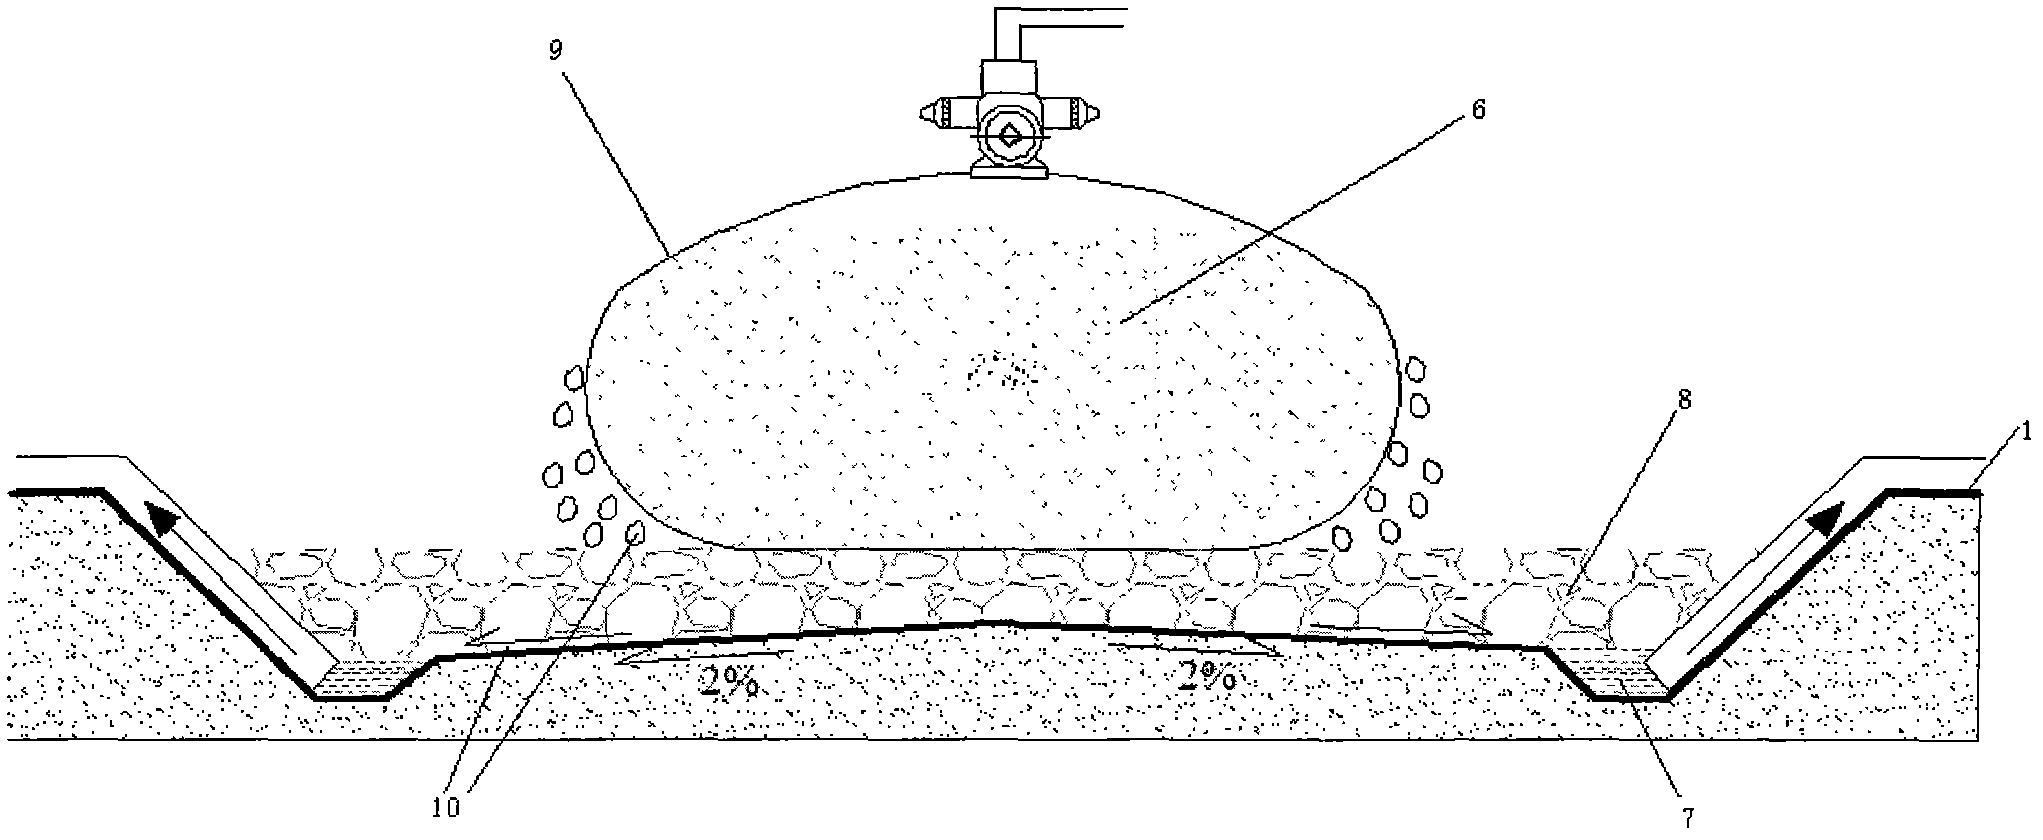 Method for landfilling and processing municipal sludge by using geotechnical filter bag